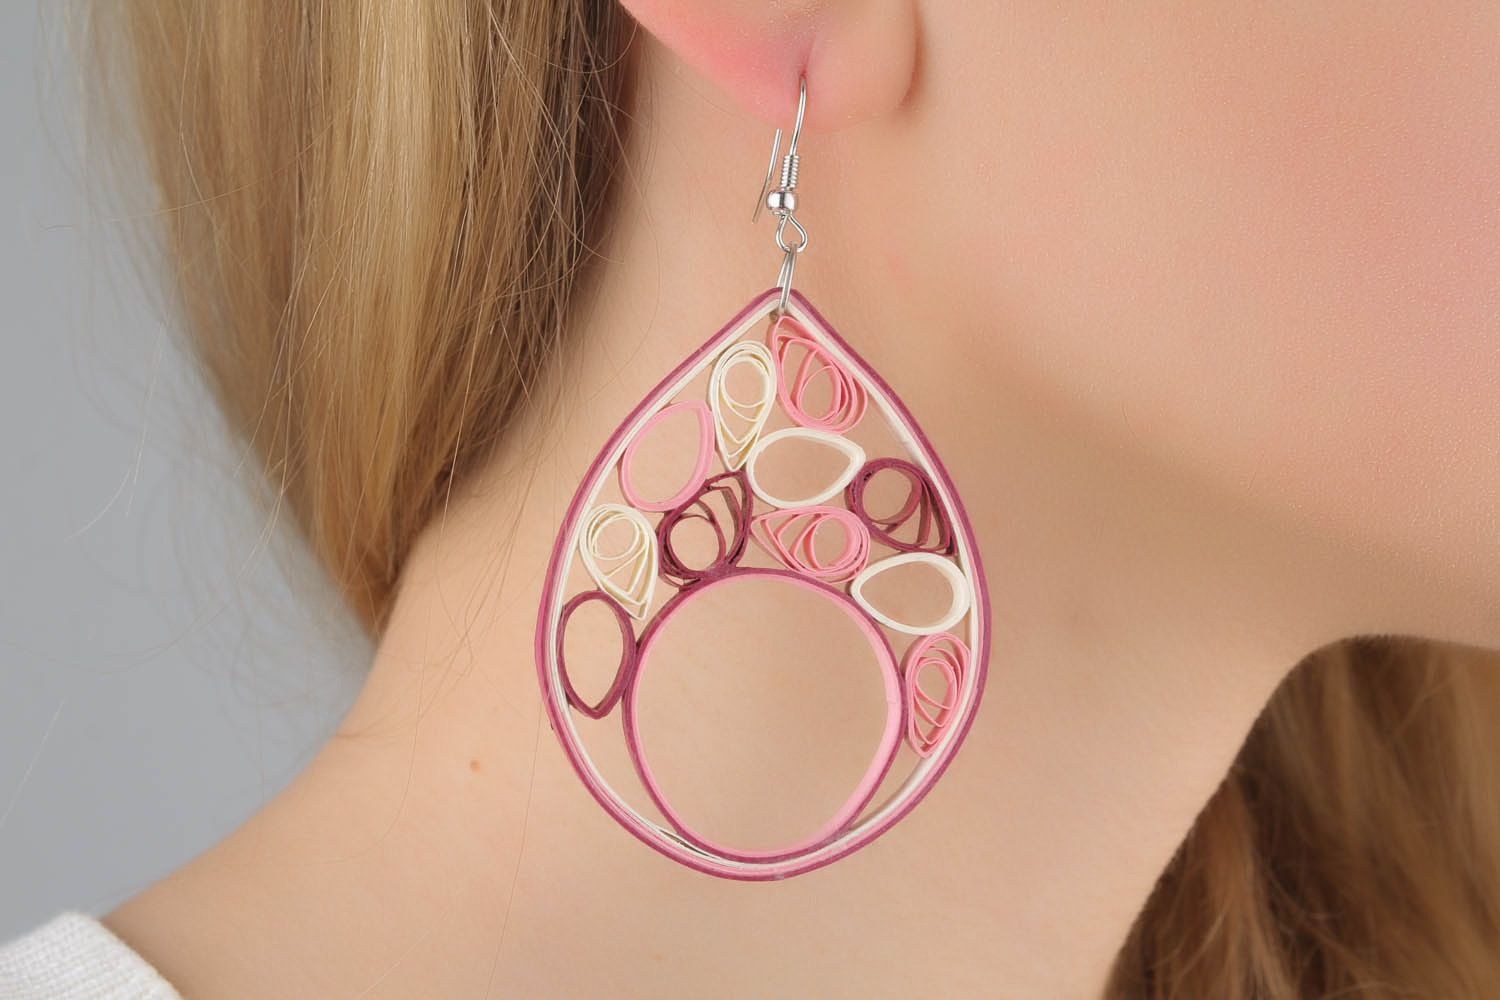 Earrings made using quilling technique photo 1